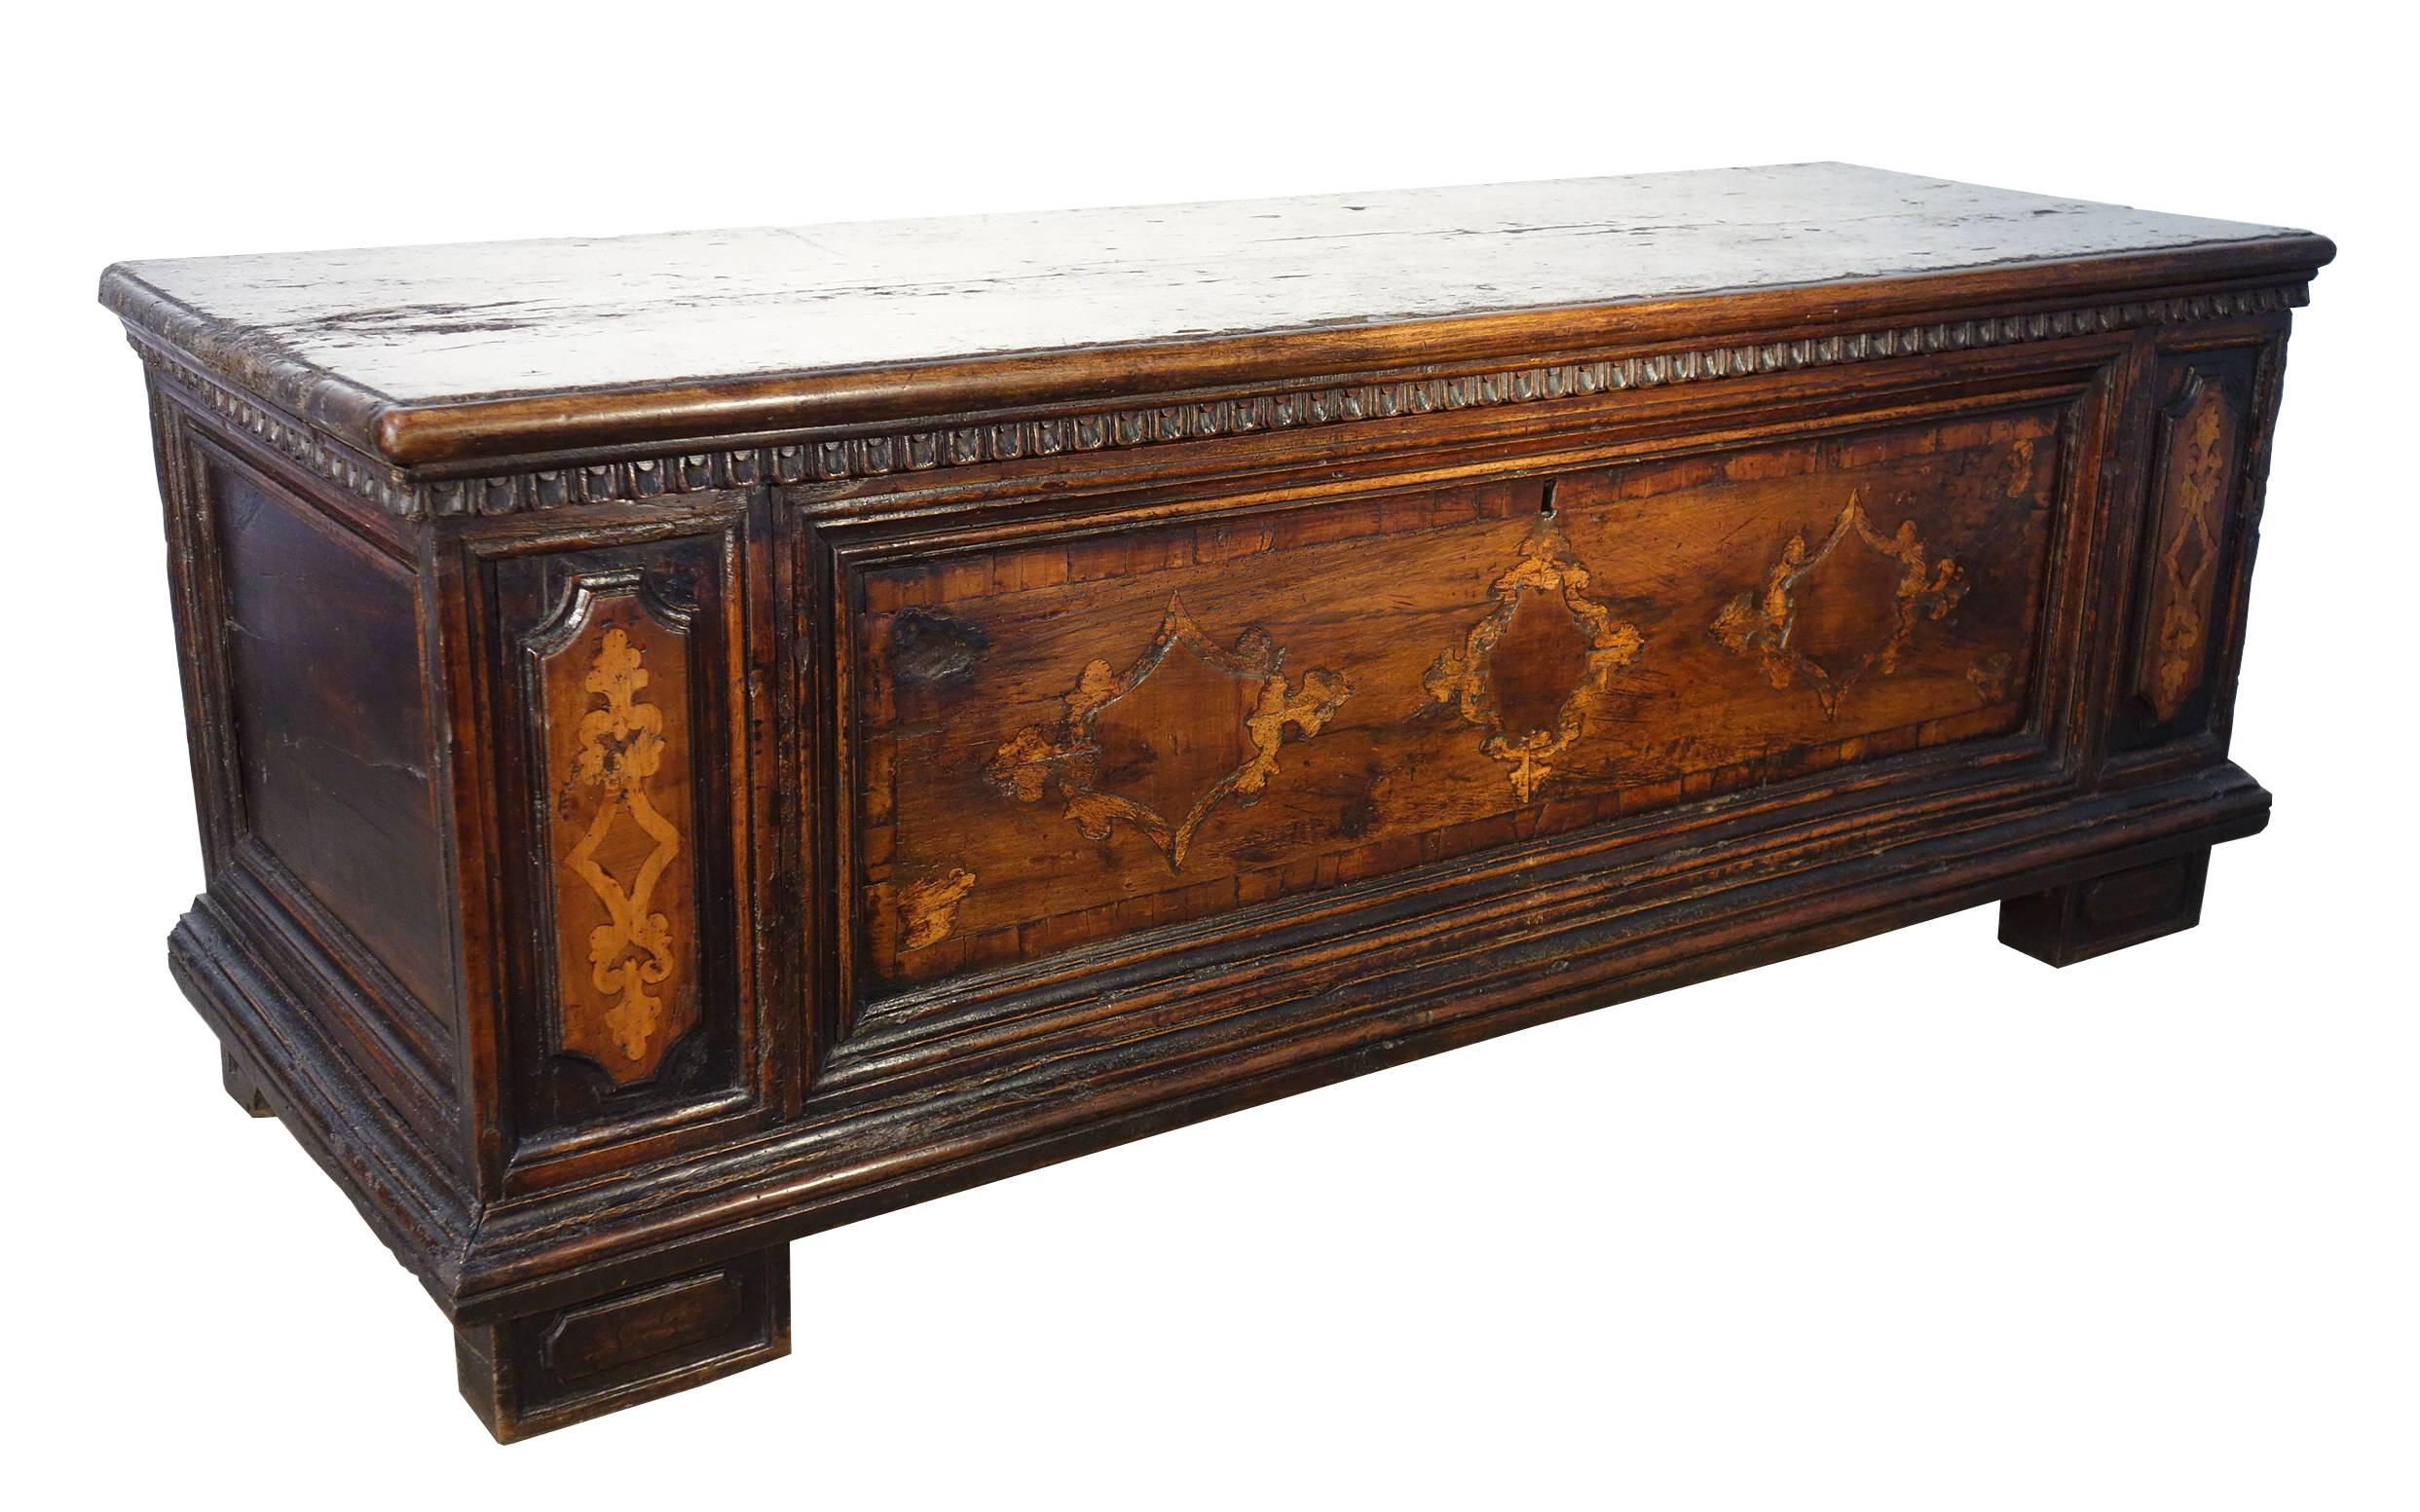 Late 17th century Tuscan dark walnut trunk with inlaid geometric patterns on the front and squared feet. Incredible thick solid walnut frame. Clean inside immaculate condition, original hardware and key. Inside drawer compartment that keep the top